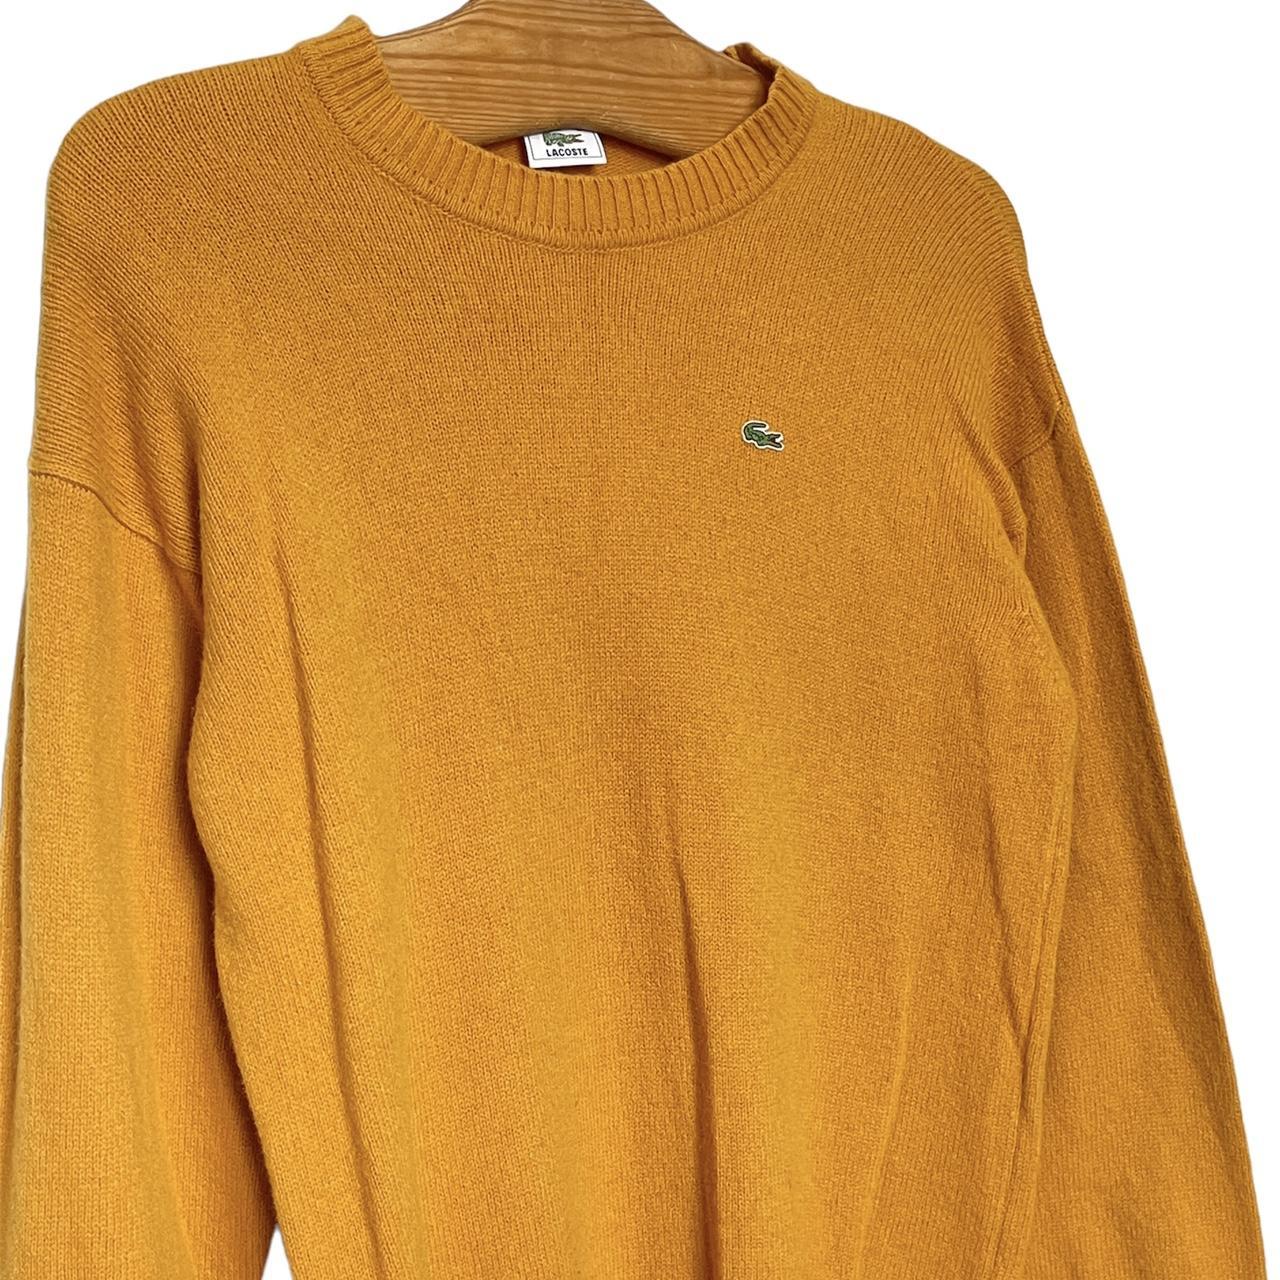 Product Image 2 - Lacoste orange wool sweater very